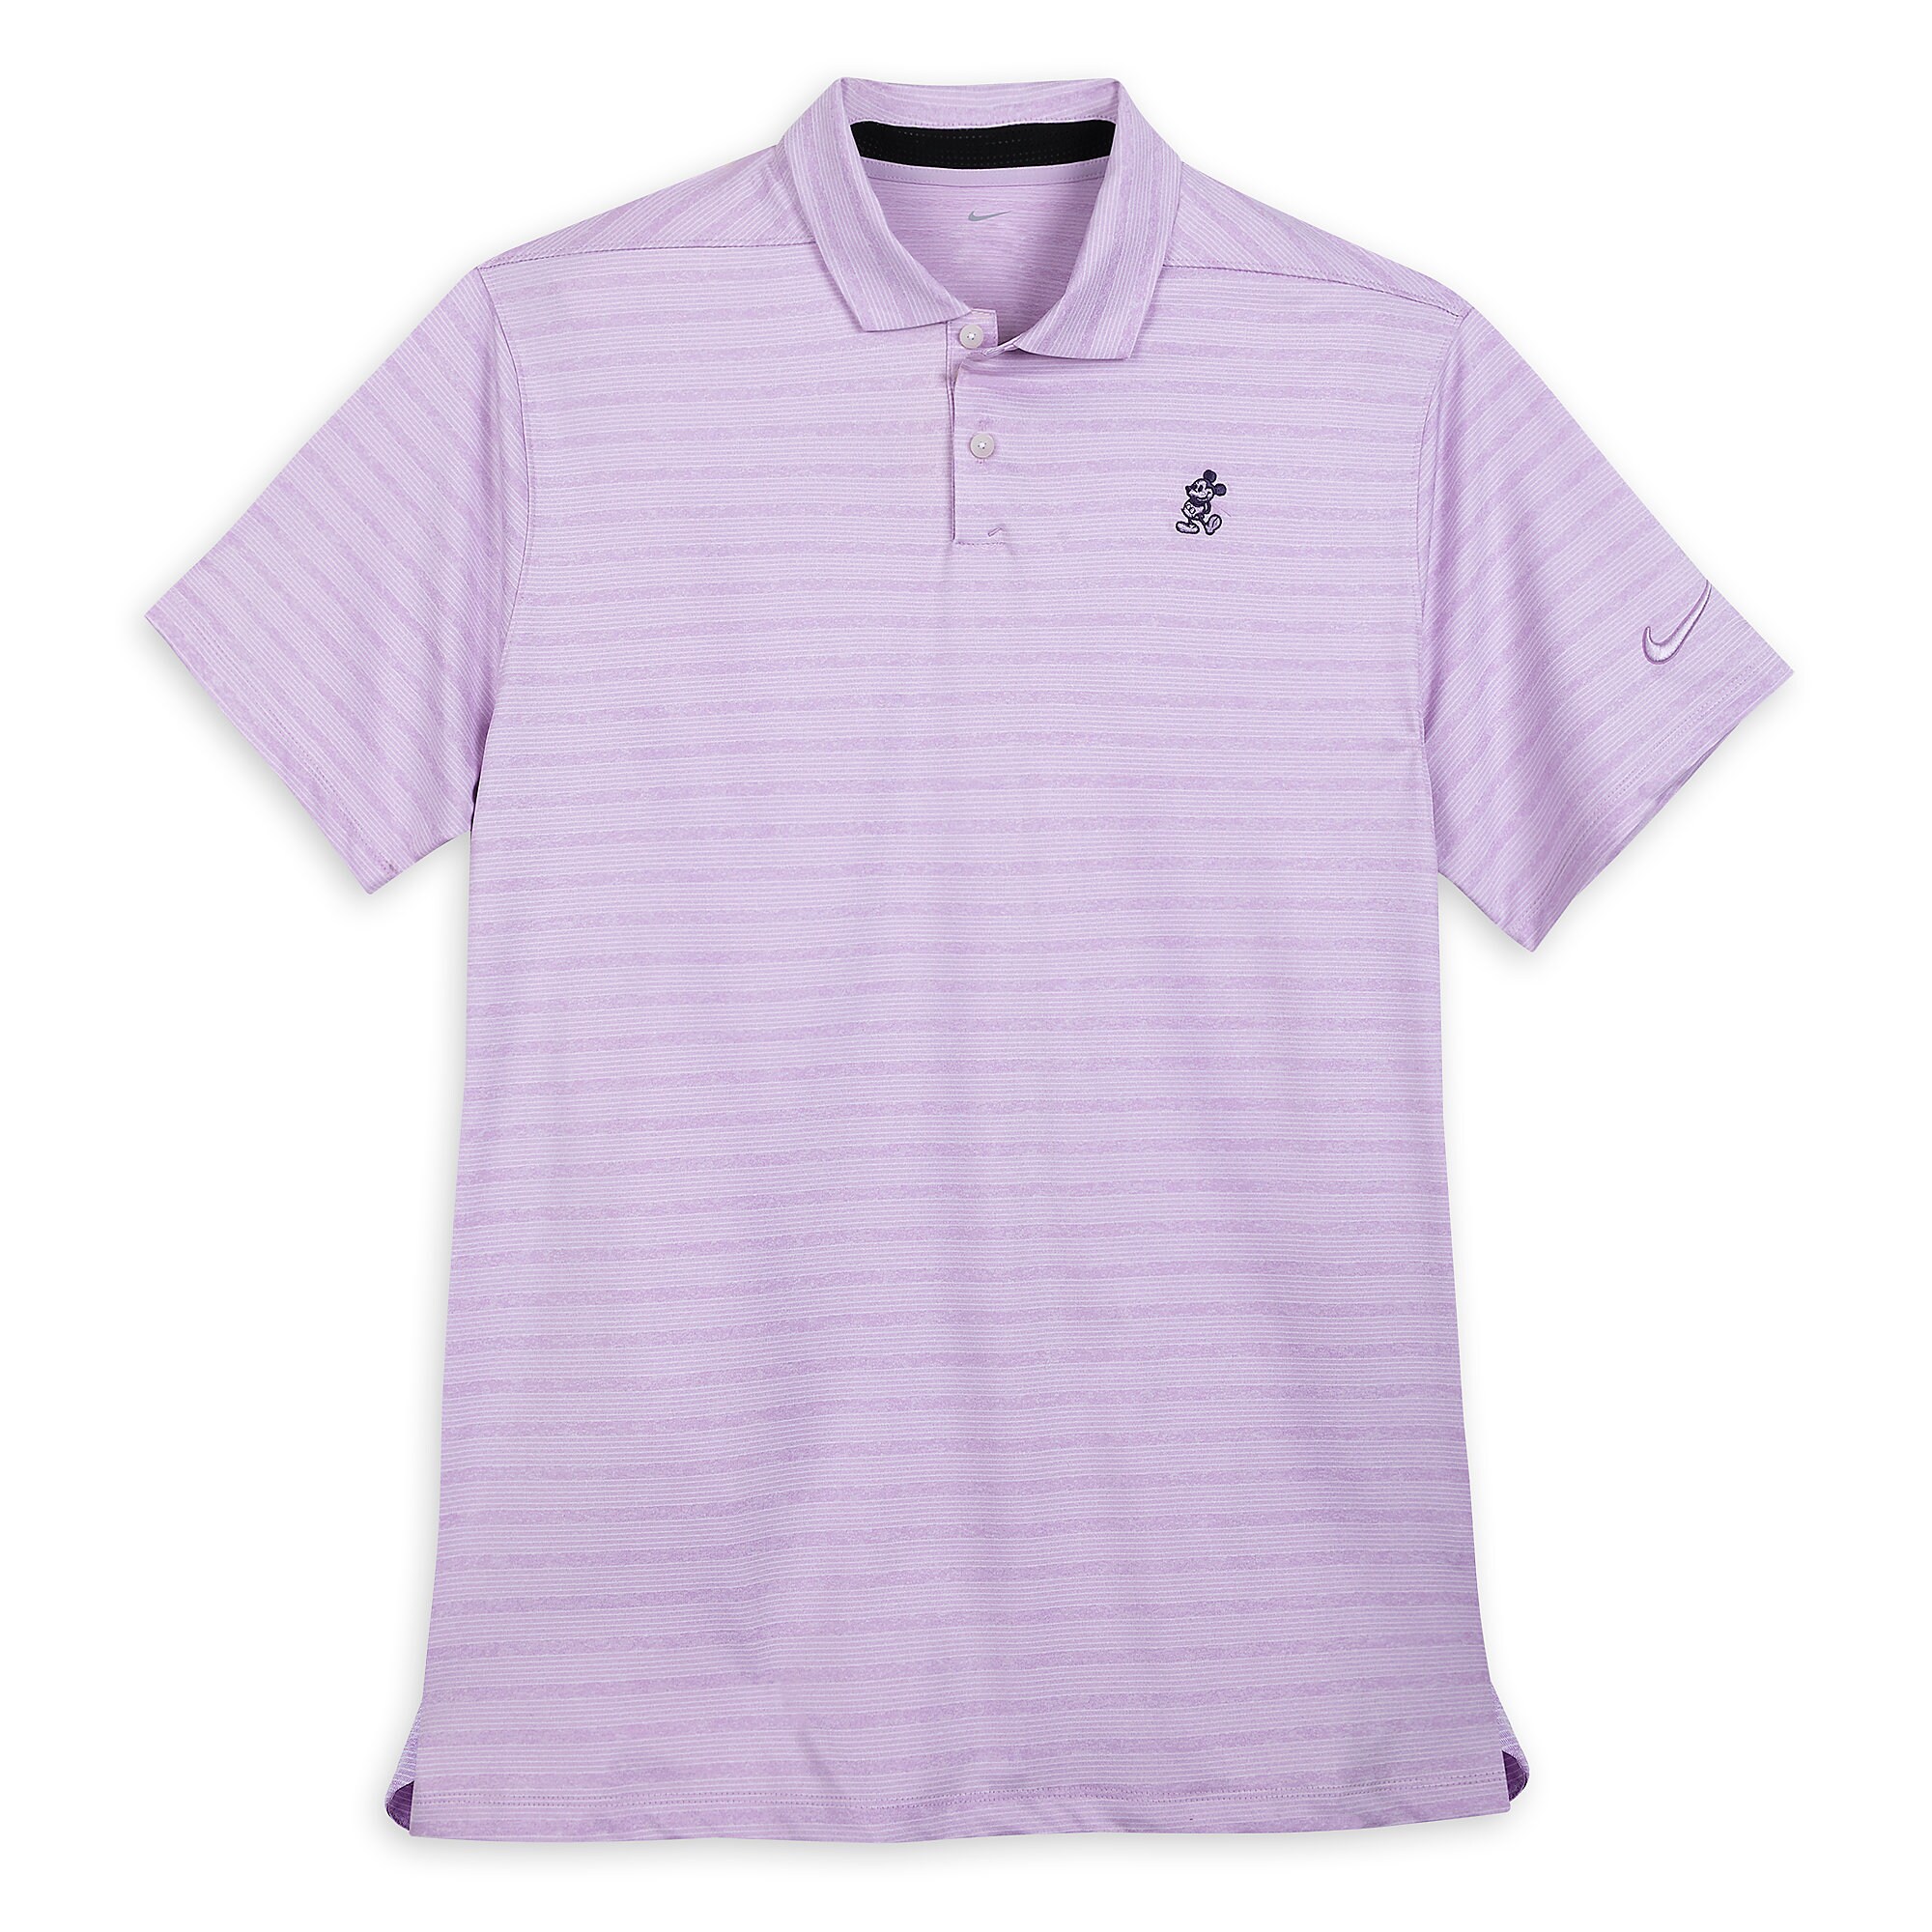 Mickey Mouse Polo for Men by Nike - Lilac